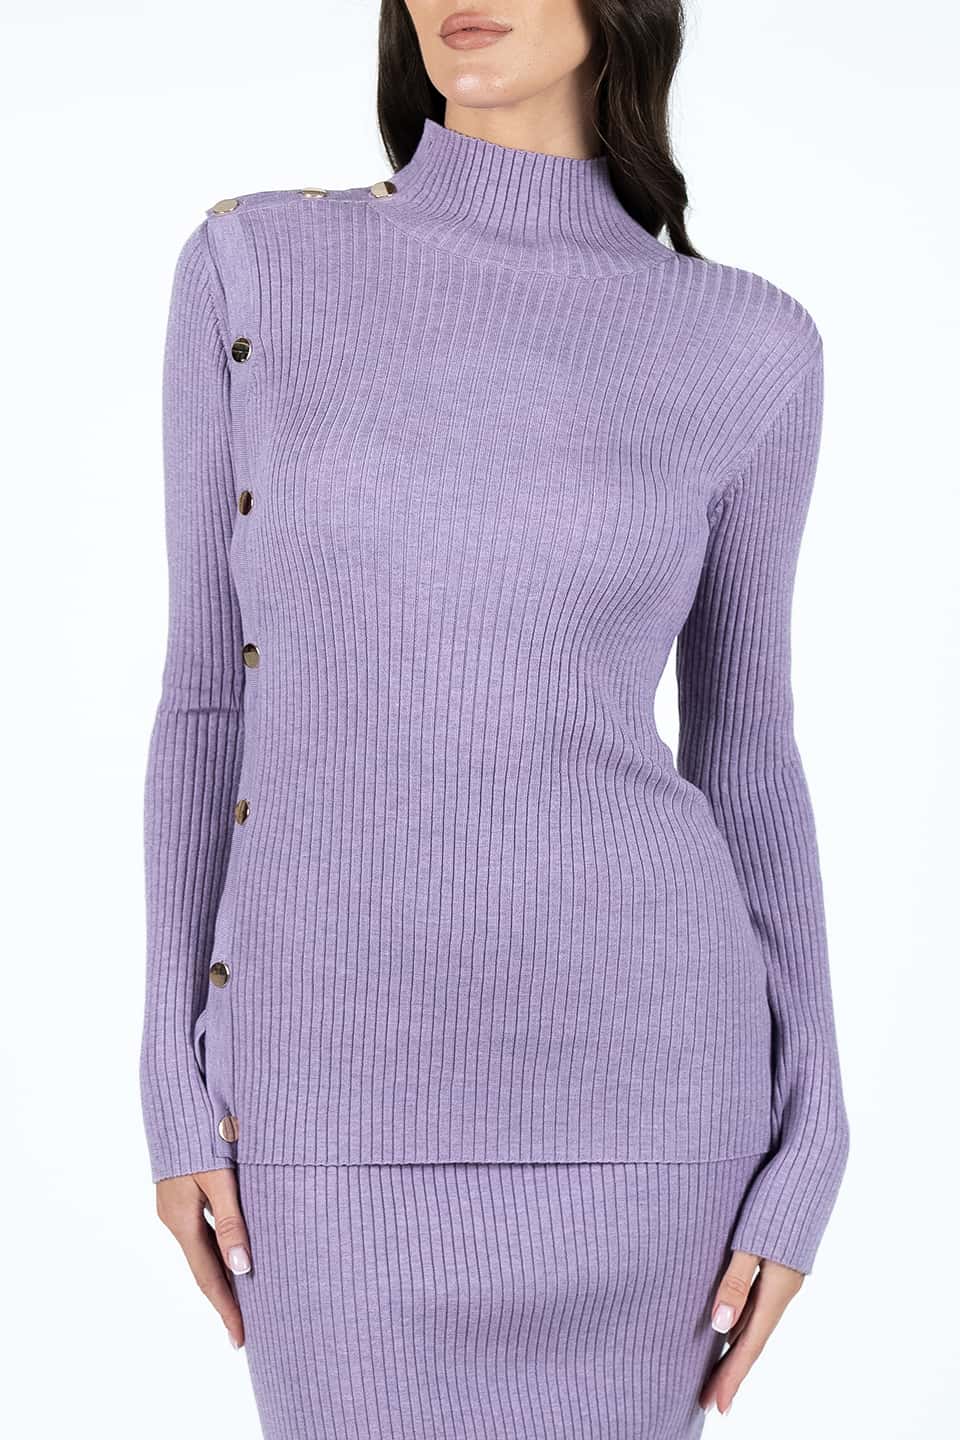 Shop online trendy Violet Women long sleeve from Dodo Bar Or Fashion designer. Product gallery 1